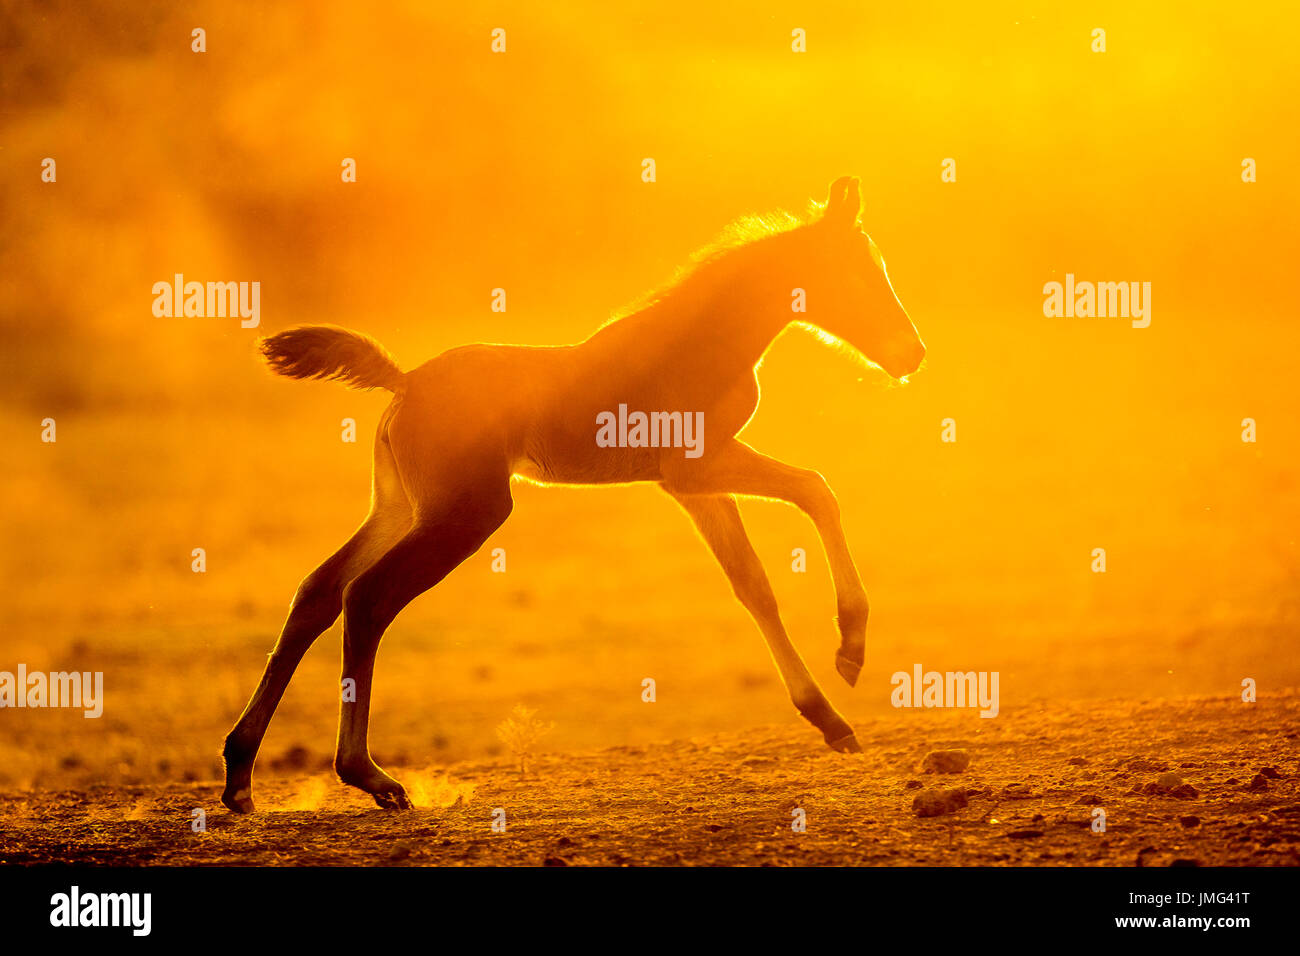 Marwari Horse. Bay filly-foal galloping in evening light. India Stock Photo